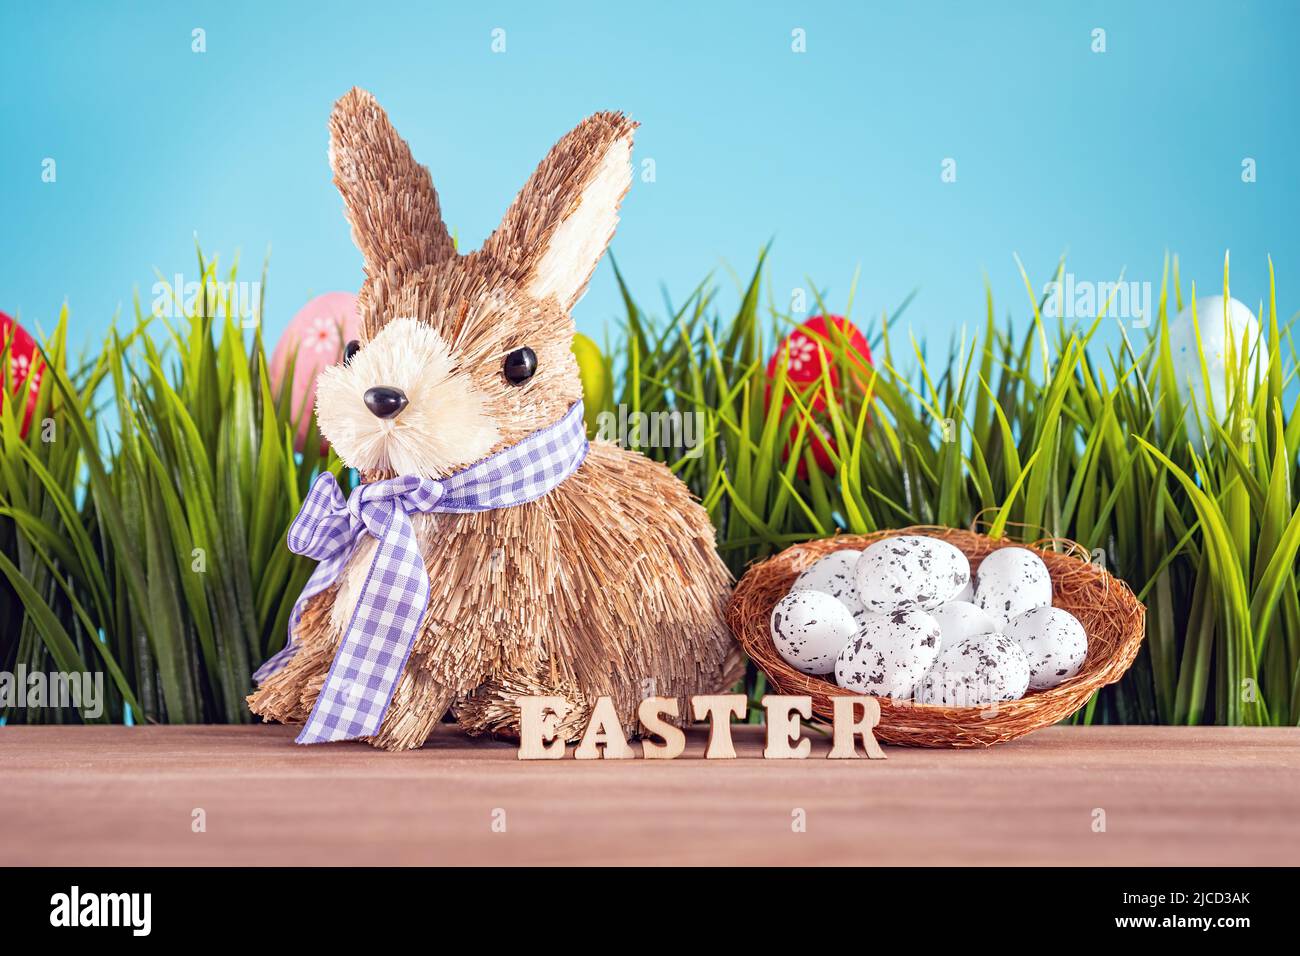 Easter eggs and cute bunny on wood table with green grass. Festive decoration Stock Photo